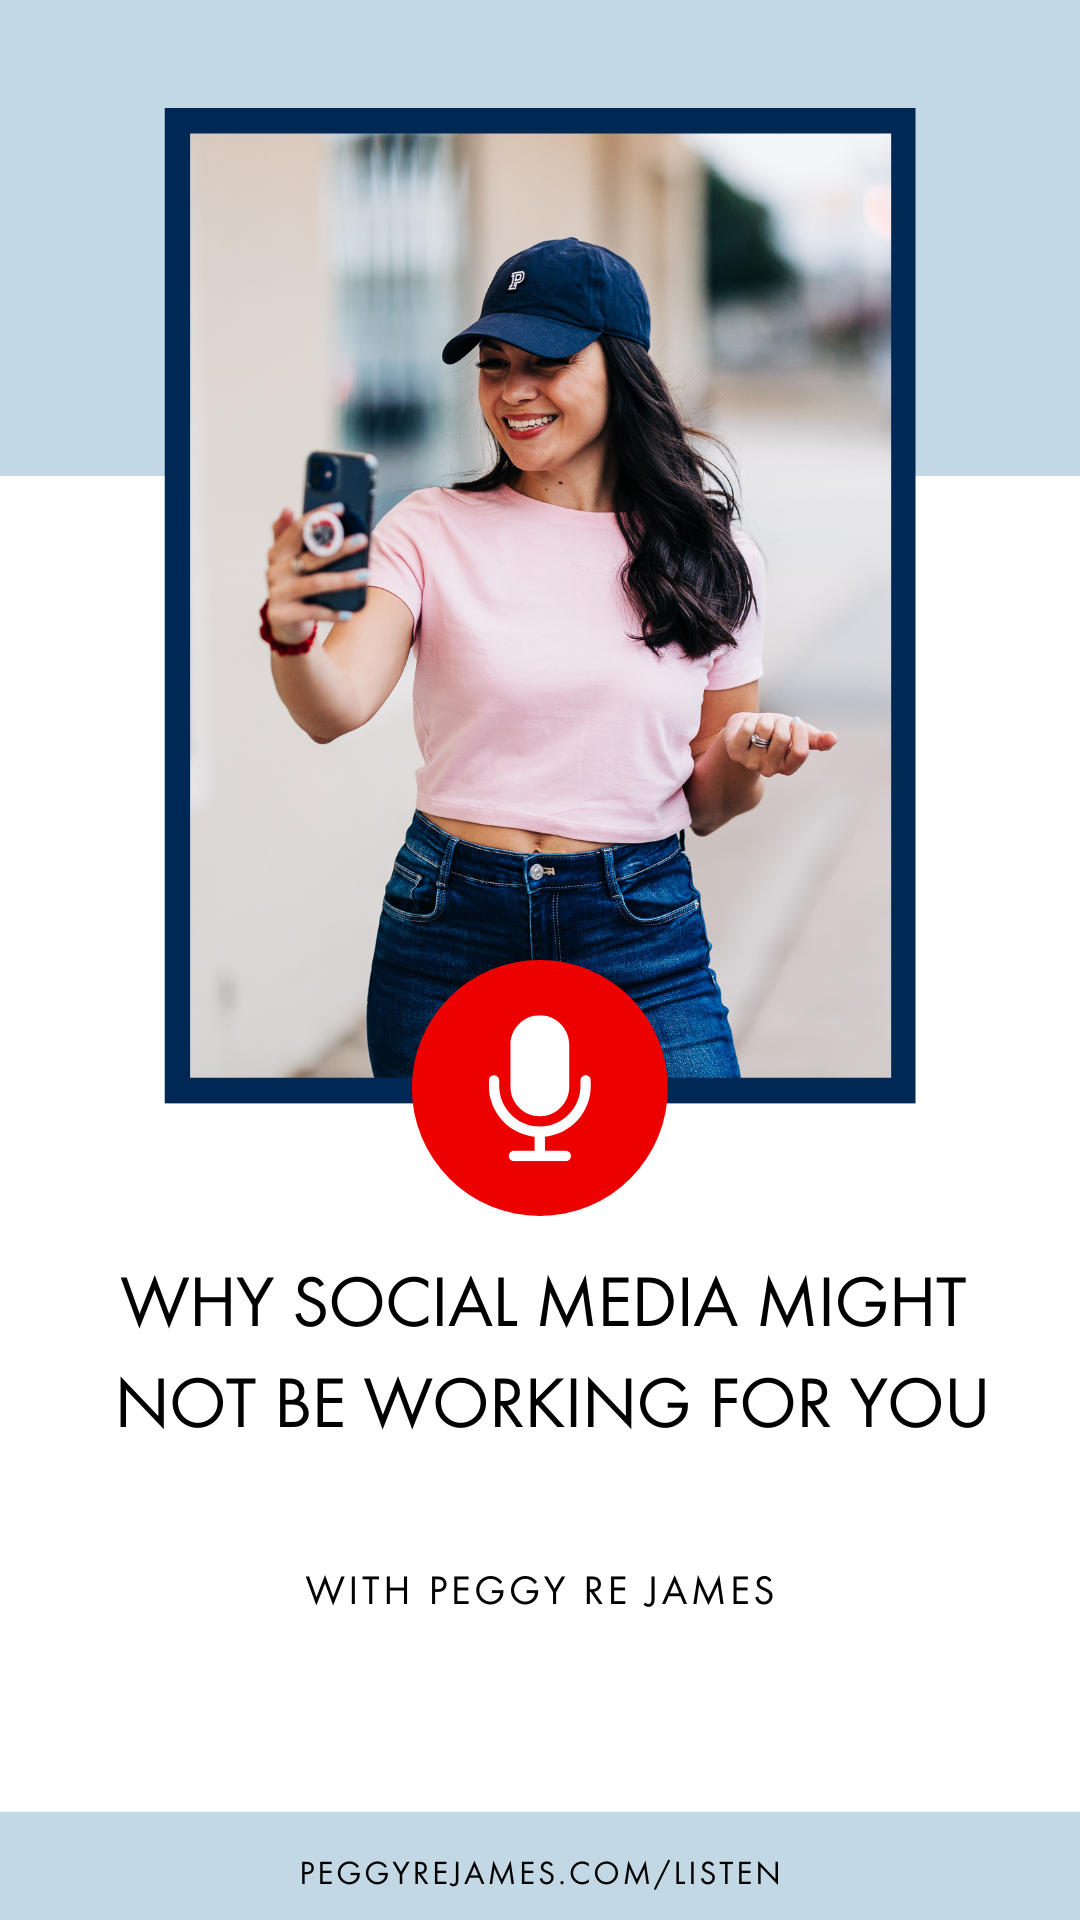 Why social media might not be working for you